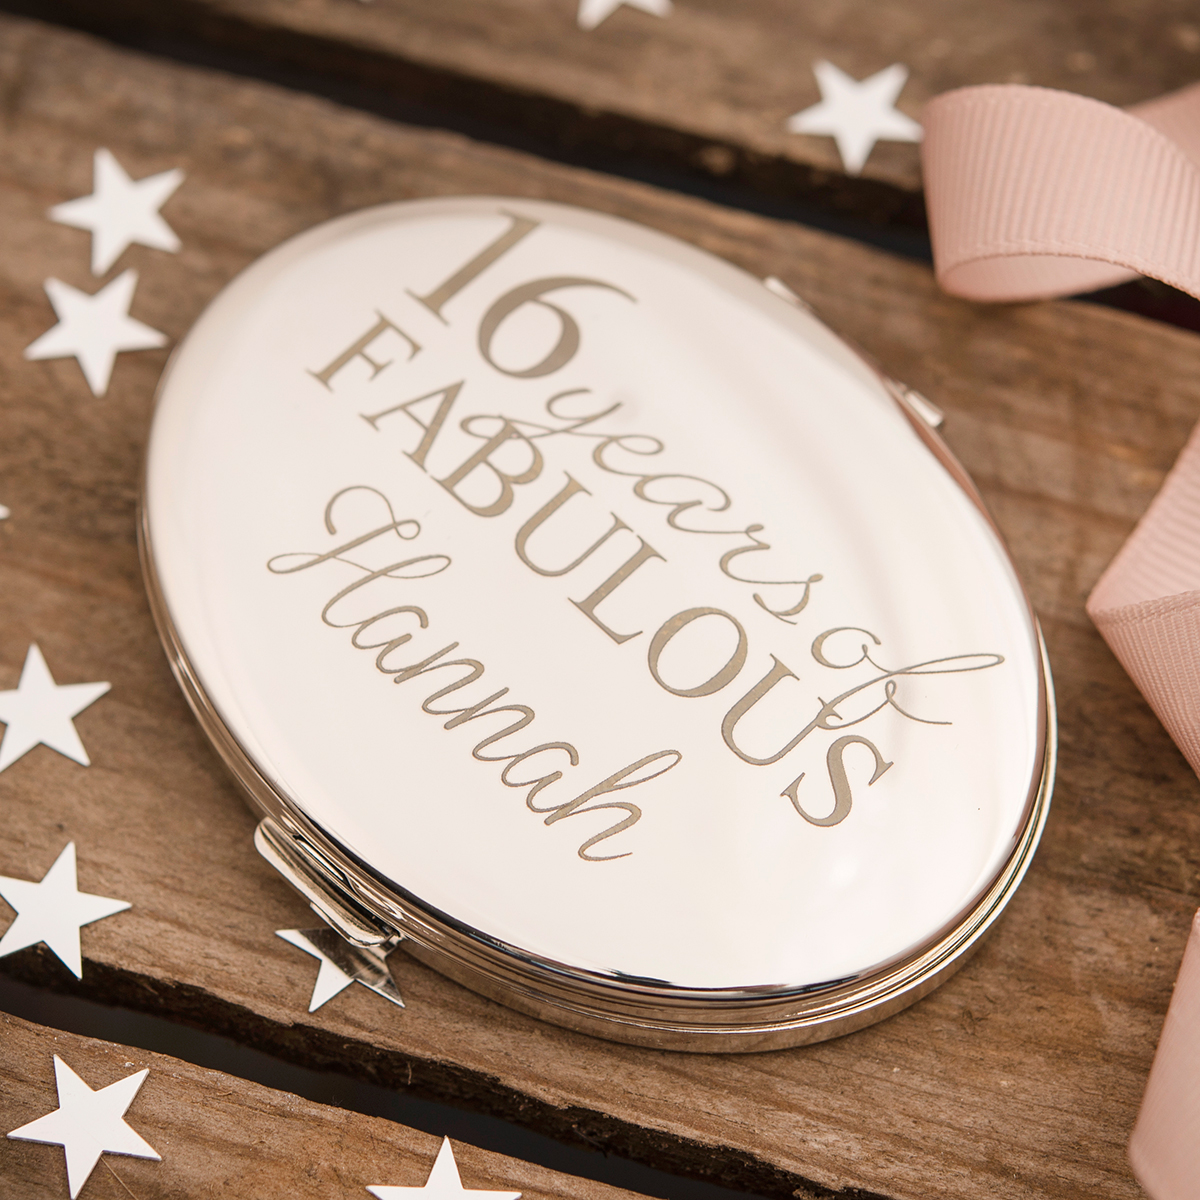 Engraved Silver Oval Compact Mirror -16 Years Of Fabulous